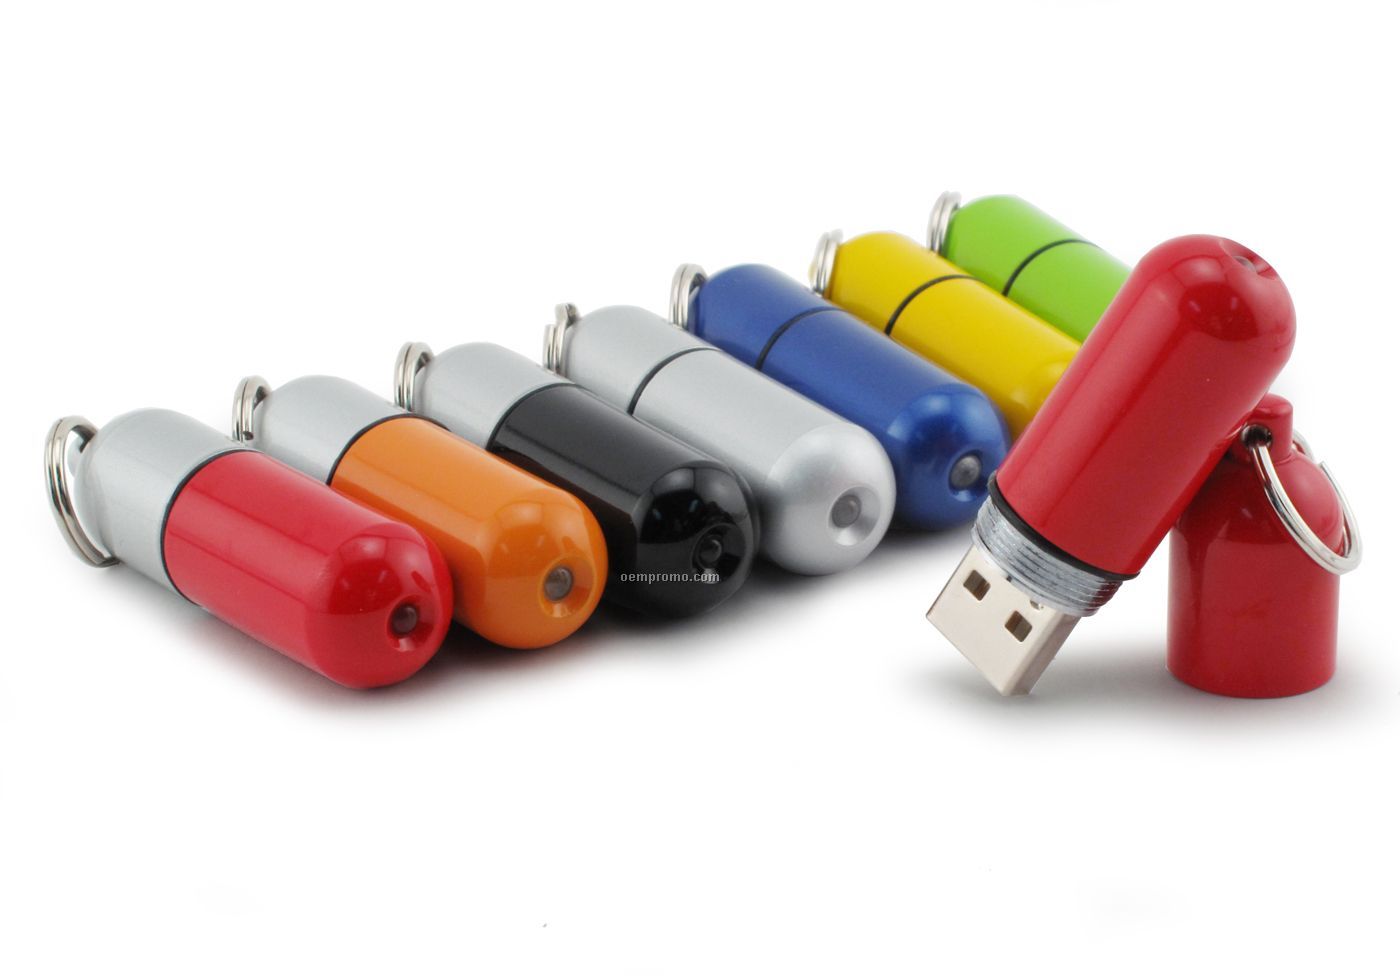 2 Gb Specialty 300 Series USB Drive - Capsule